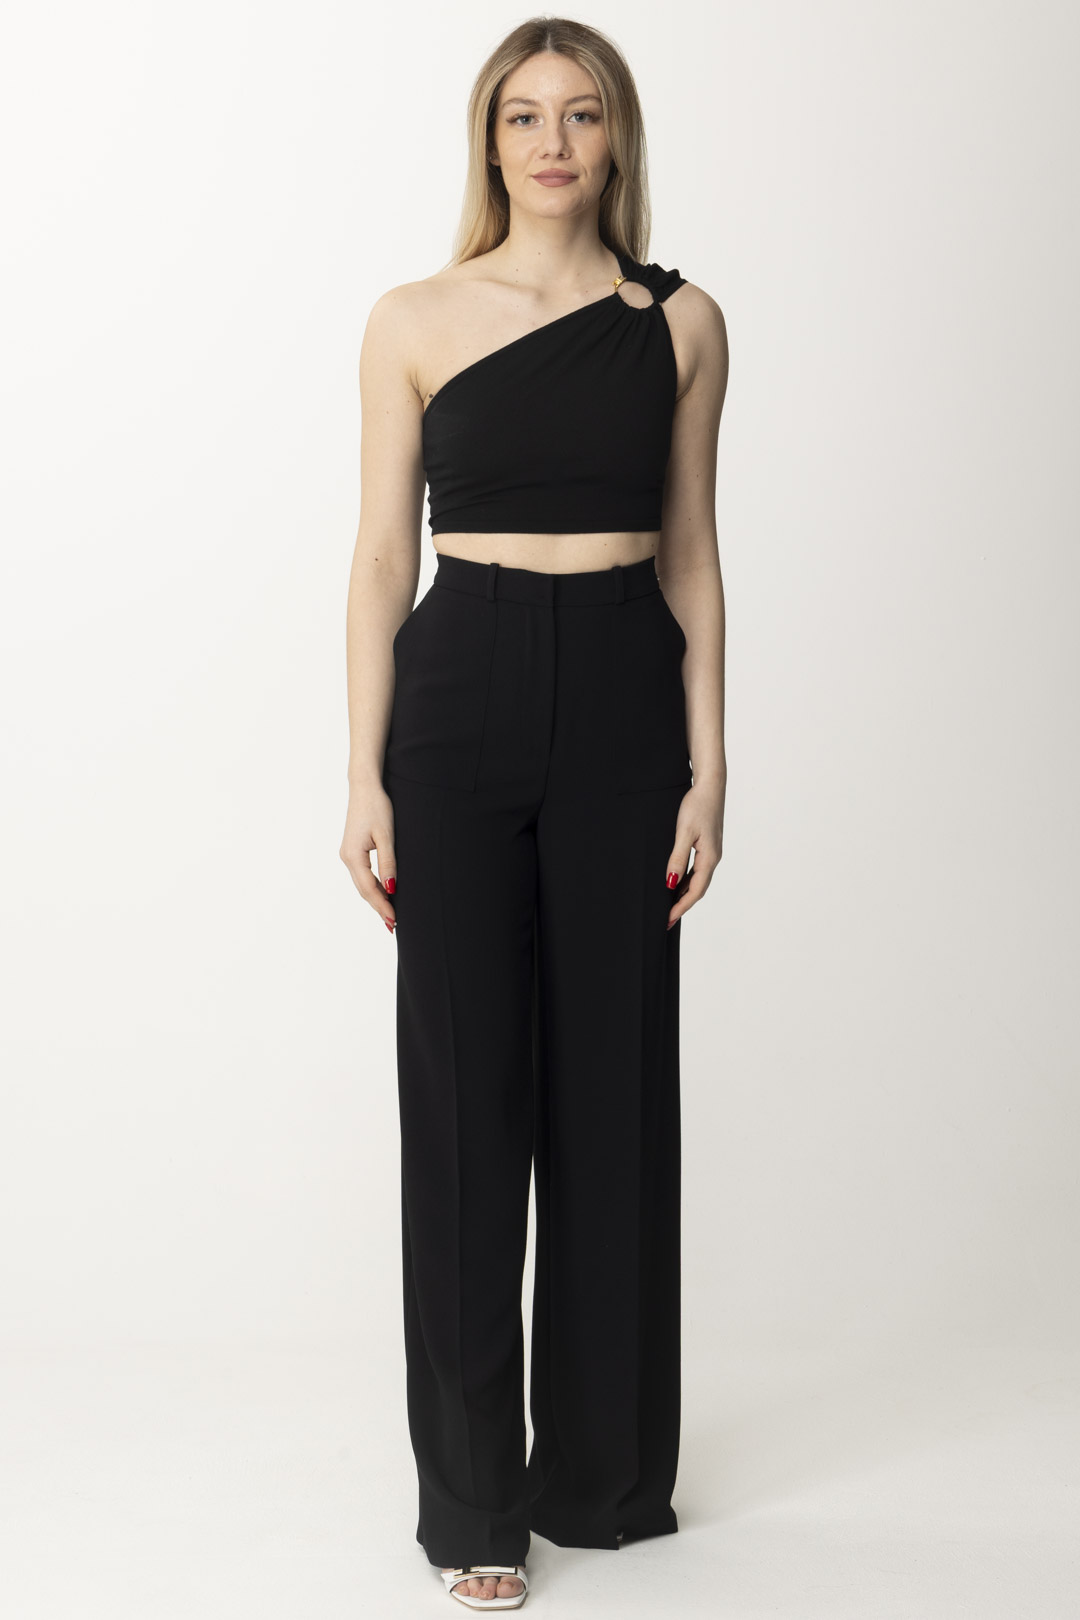 Preview: Elisabetta Franchi One-Shoulder Crop Top with Ring Nero